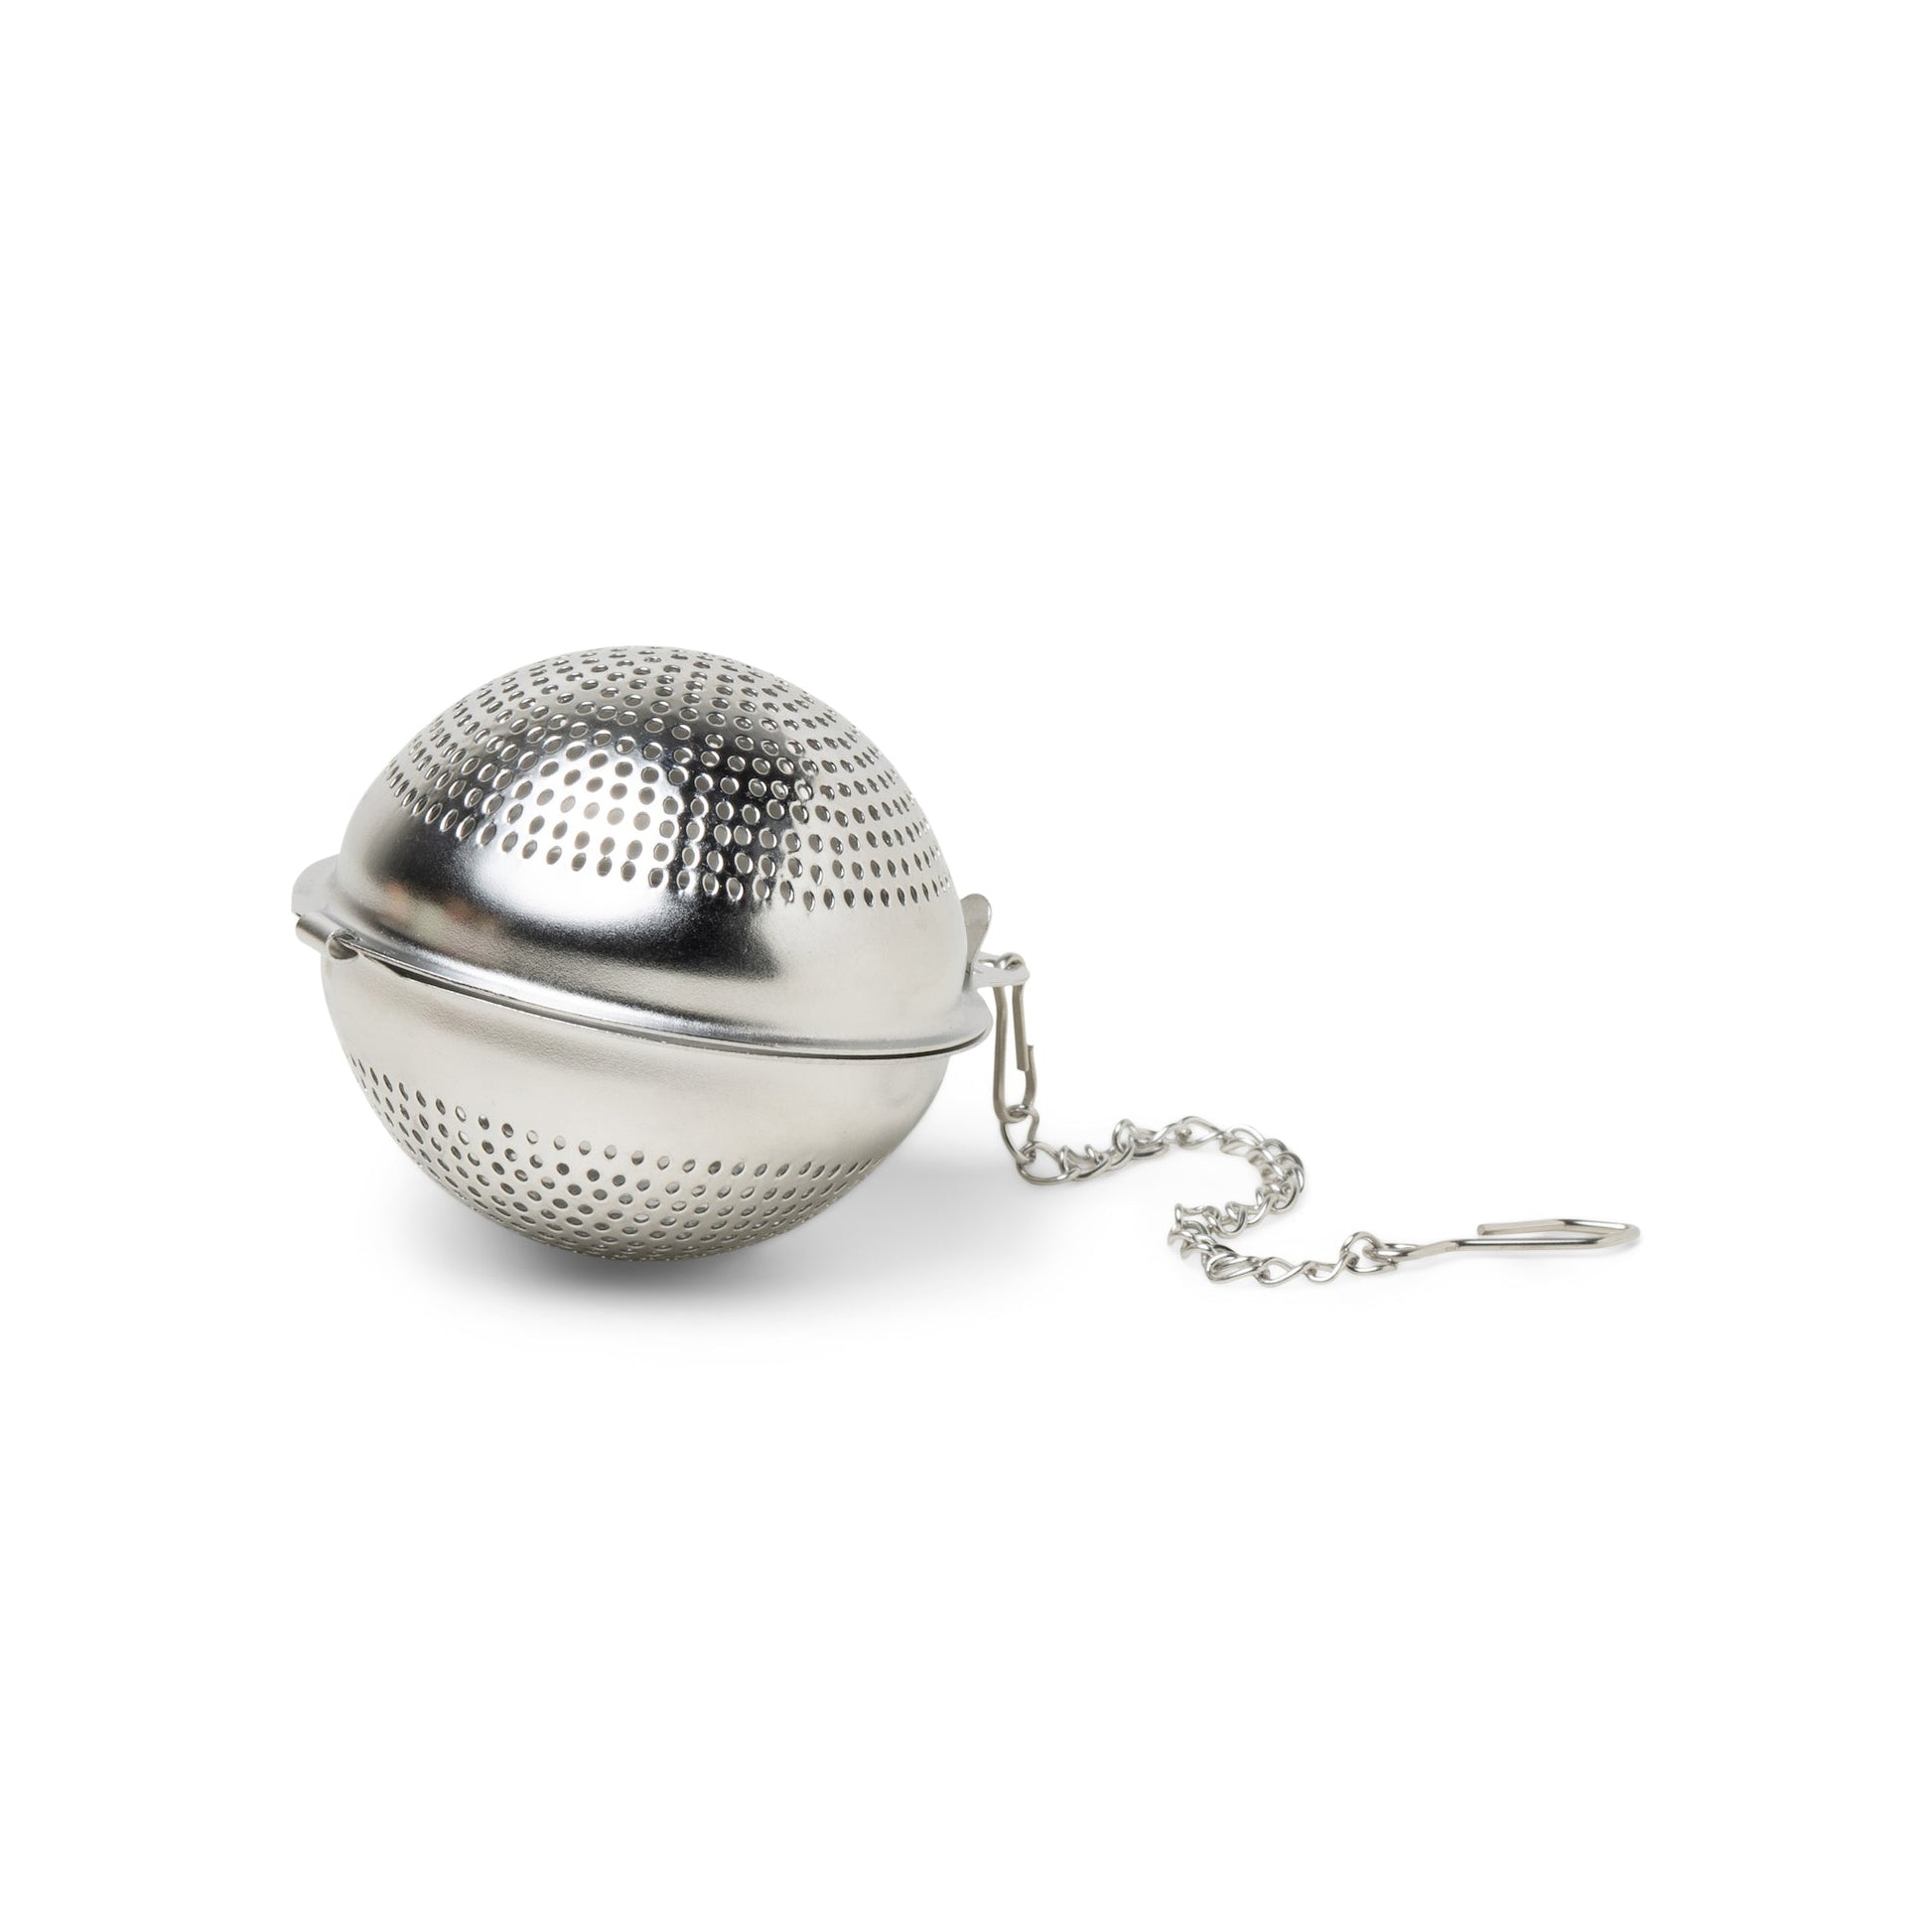 Small Stainless Steel Tea Infuser